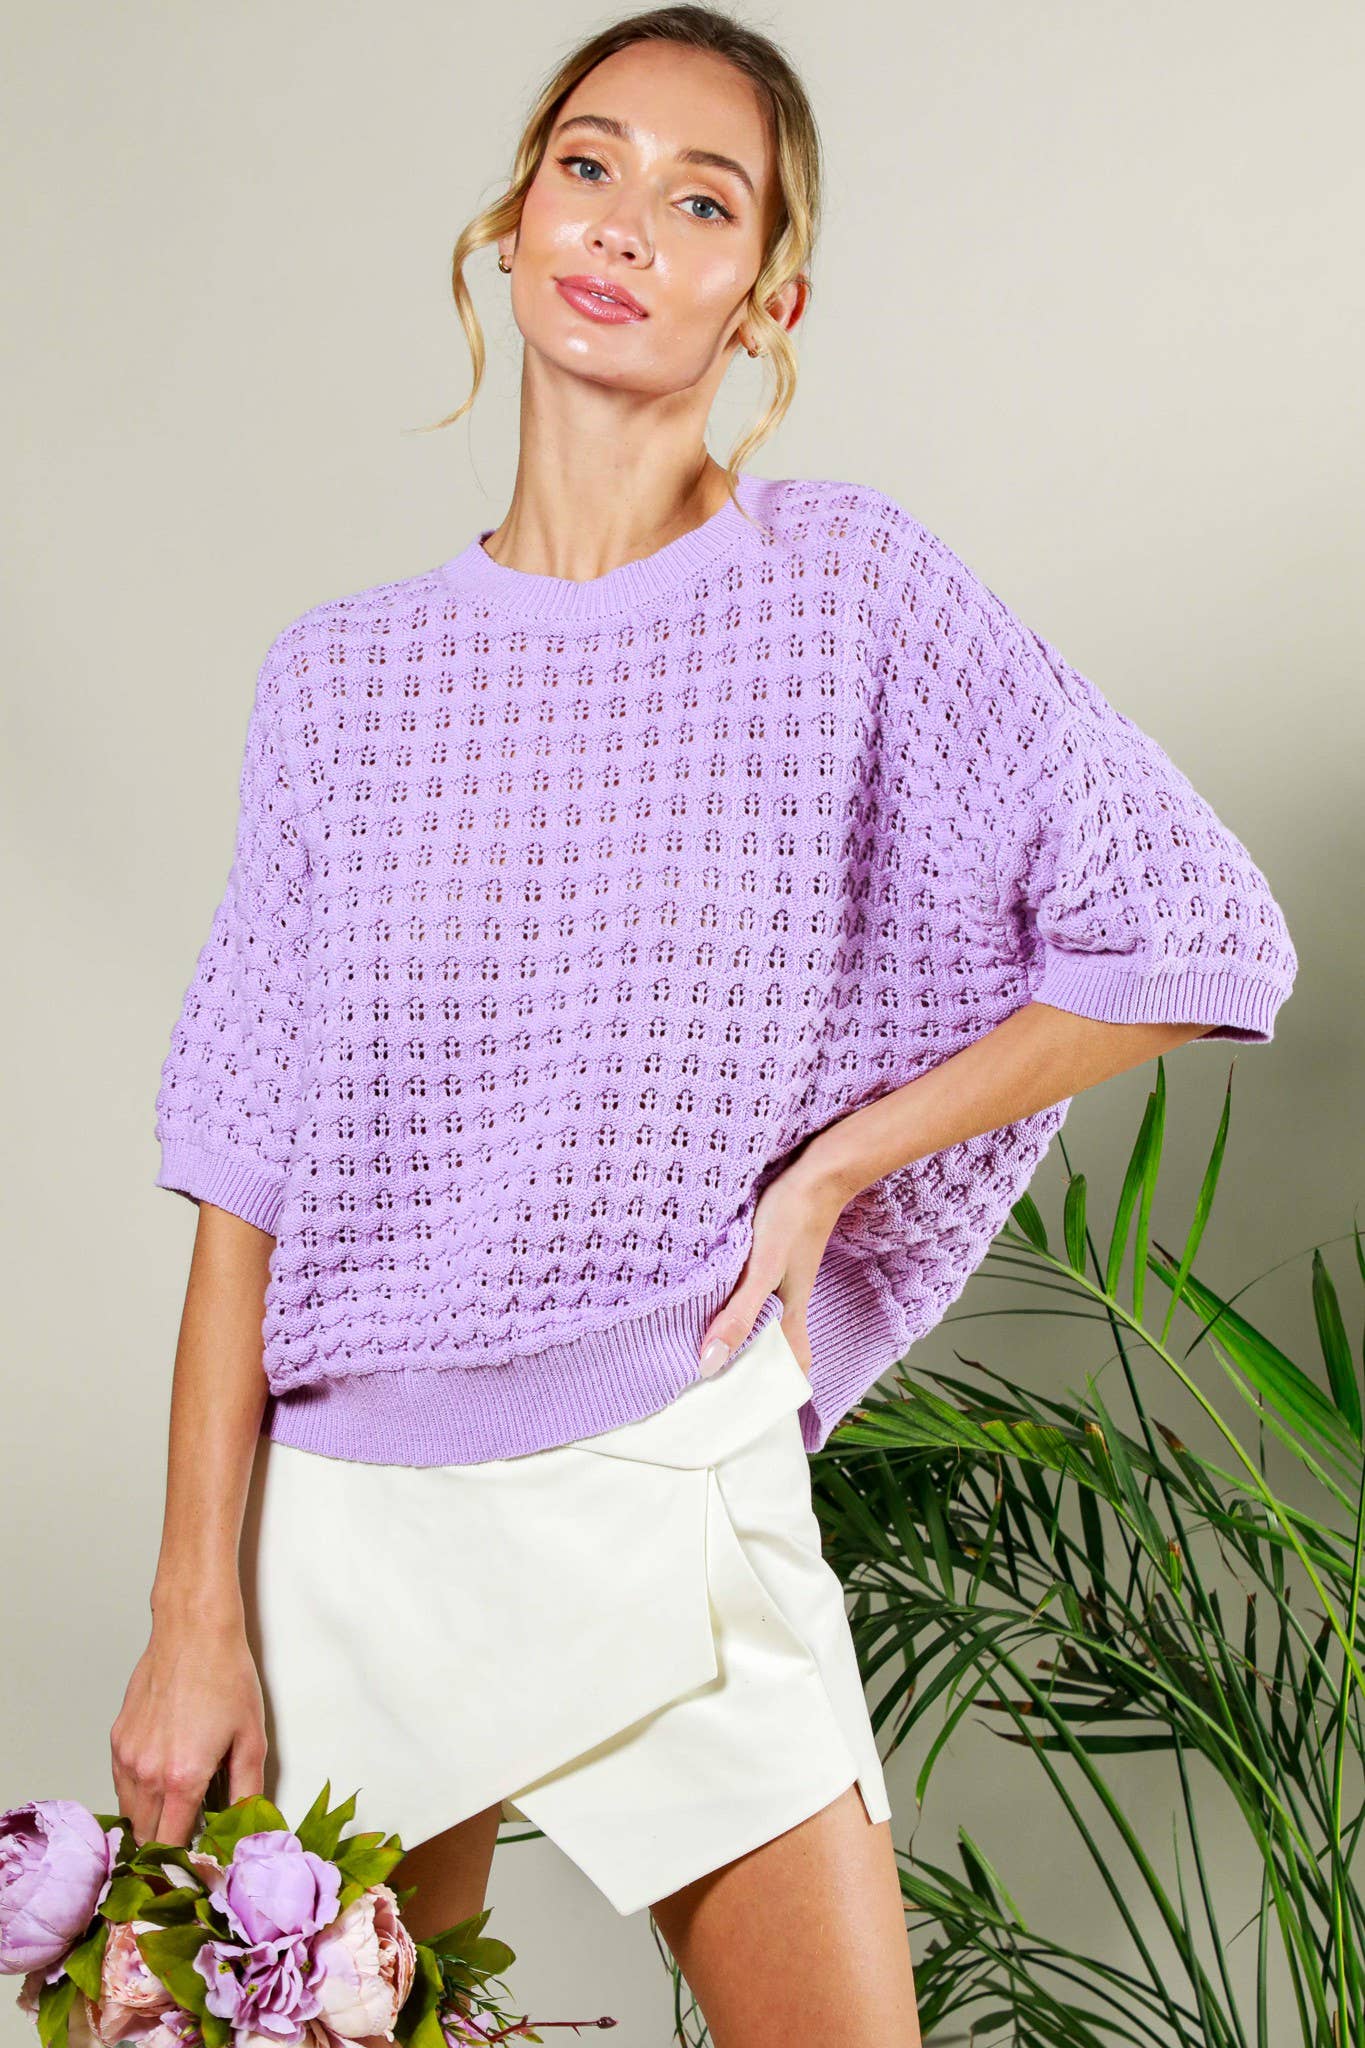 The Lavender Crocheted Sweater